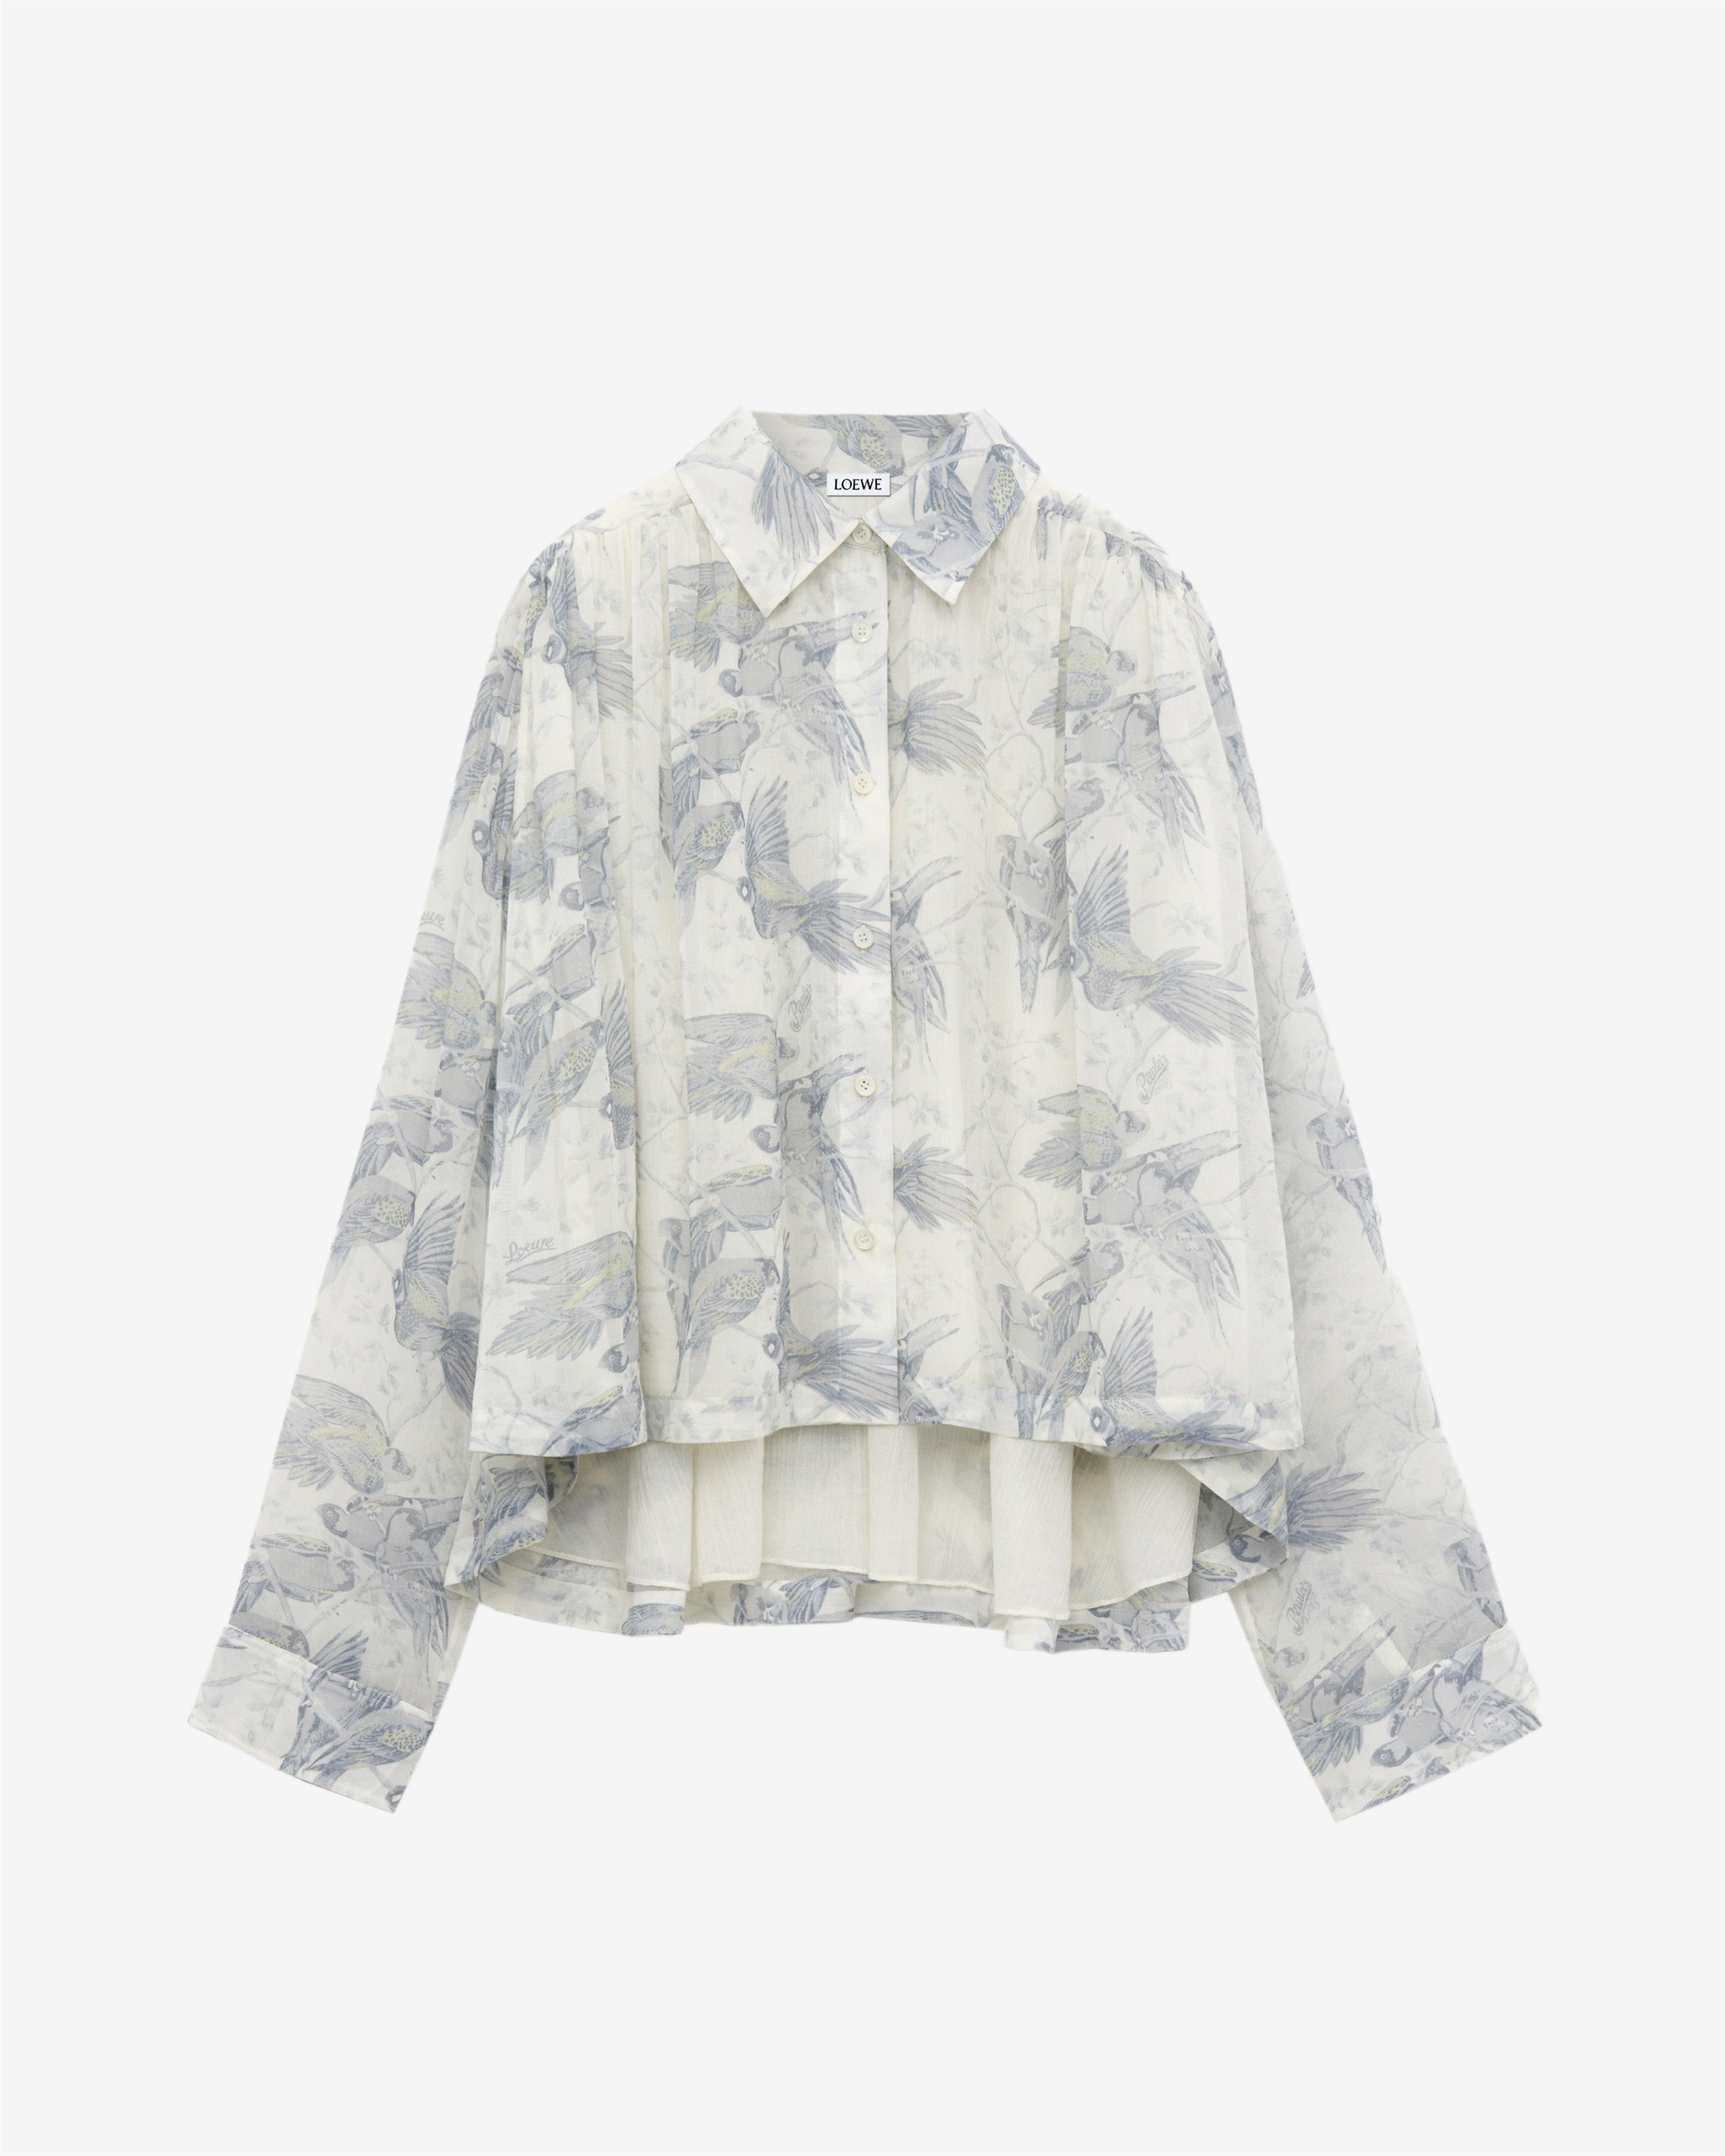 Loewe - Women's Trapeze Shirt - (Off White /Multicolor) by LOEWE